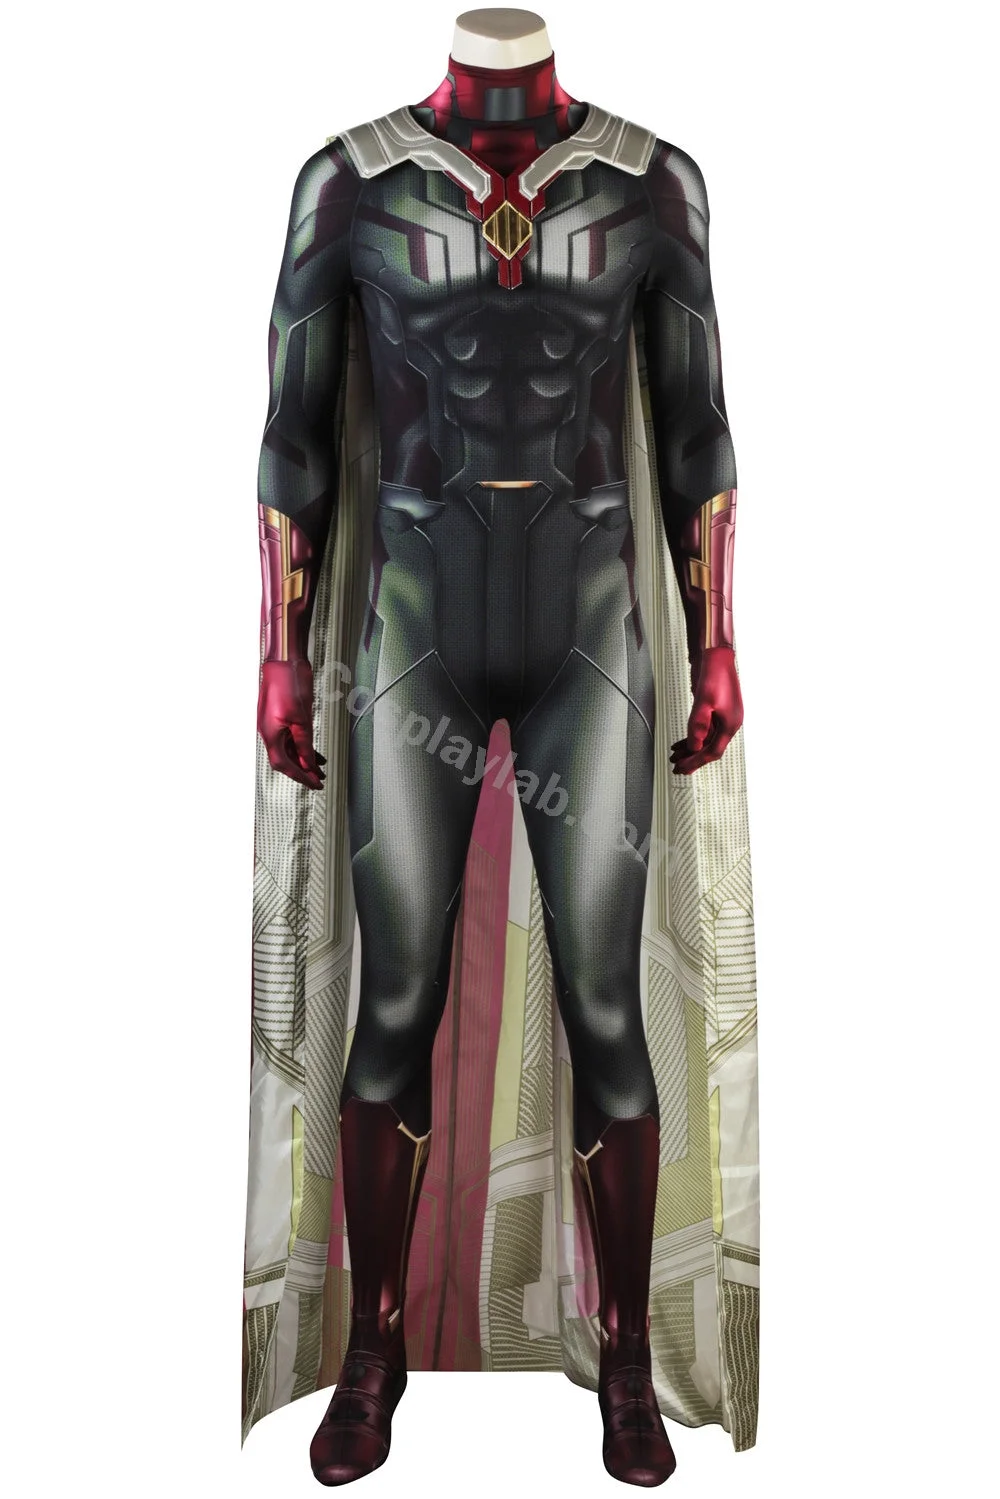 Avengers Vision Cosplay Costume Jumpsuit and Cloak Infinity War Edition By CosplayLab